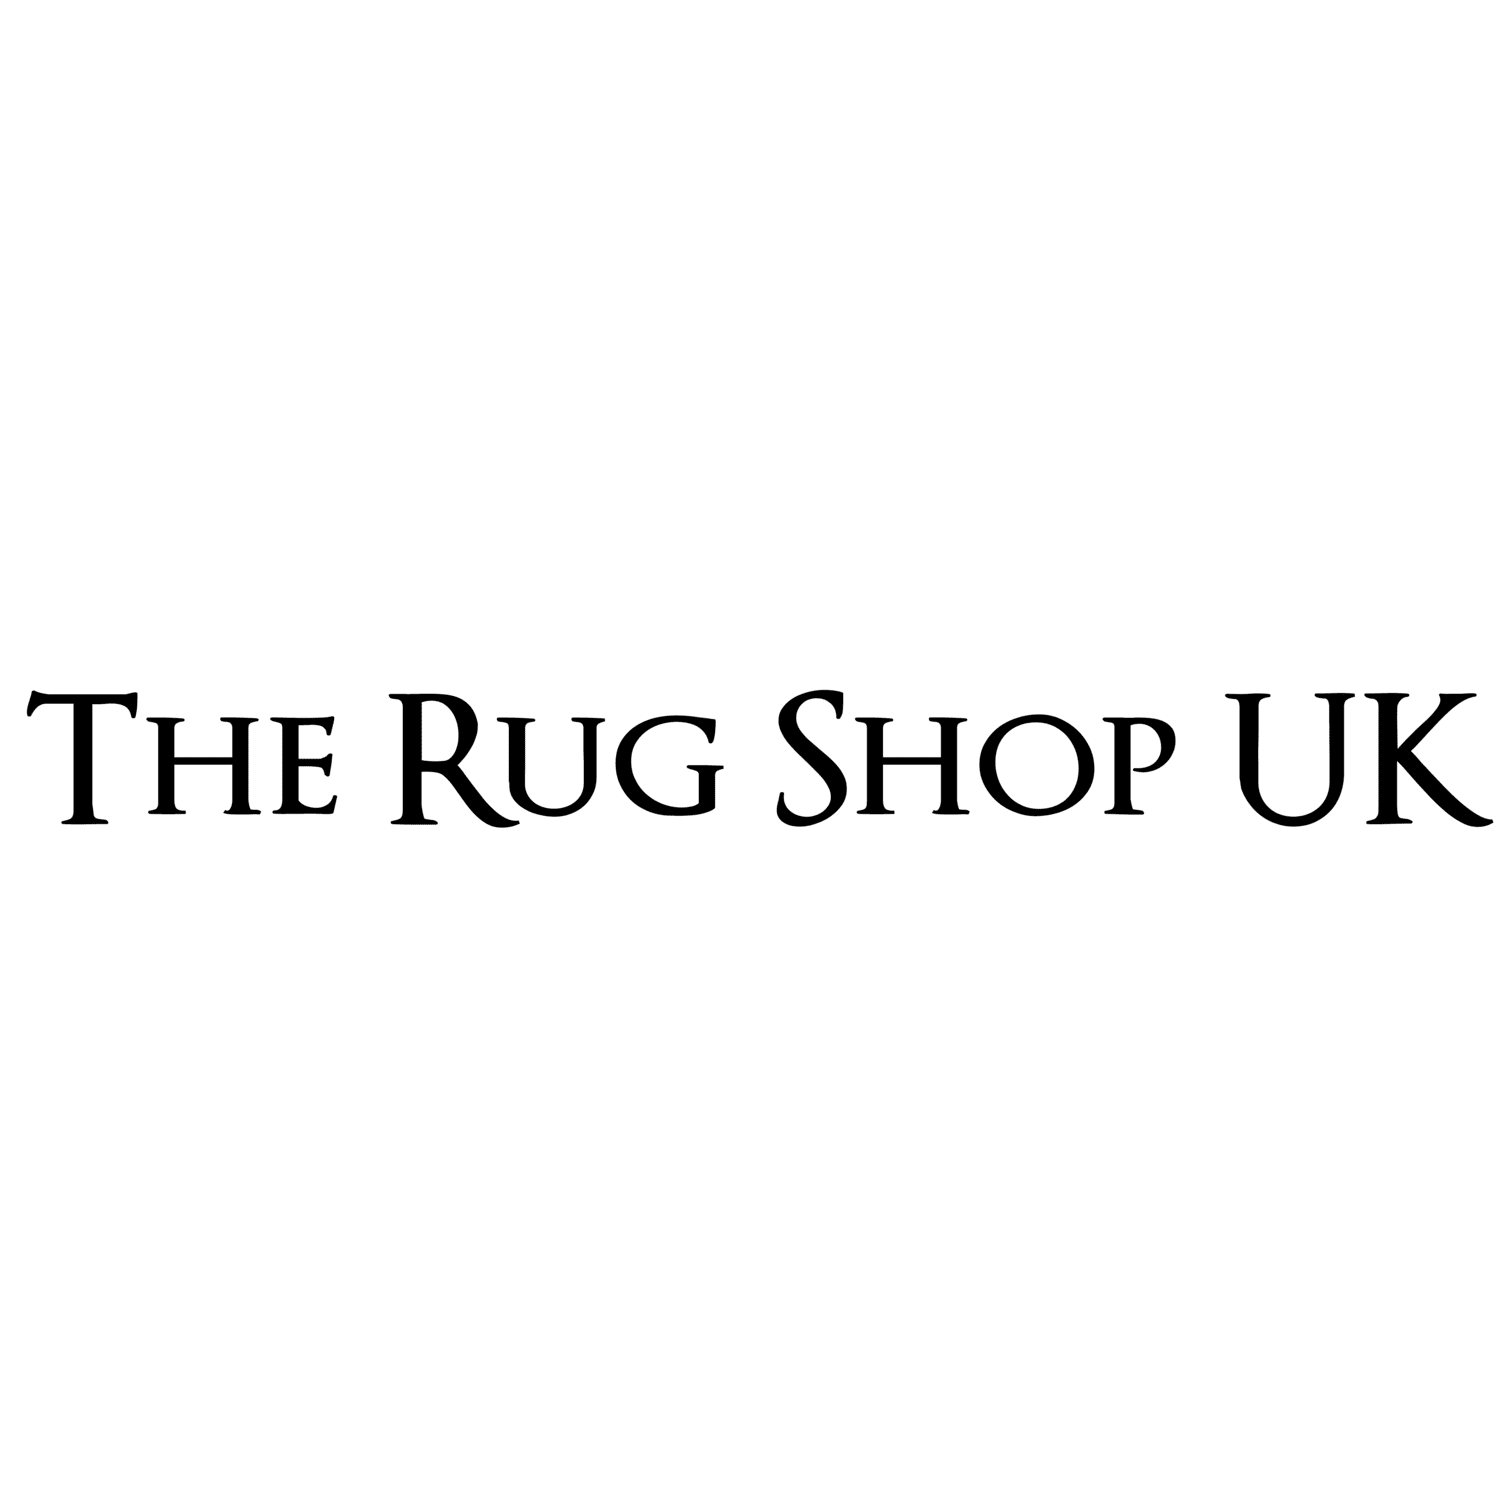 Logo of The Rug Shop UK Carpets And Rugs - Retail In Bradford, West Yorkshire